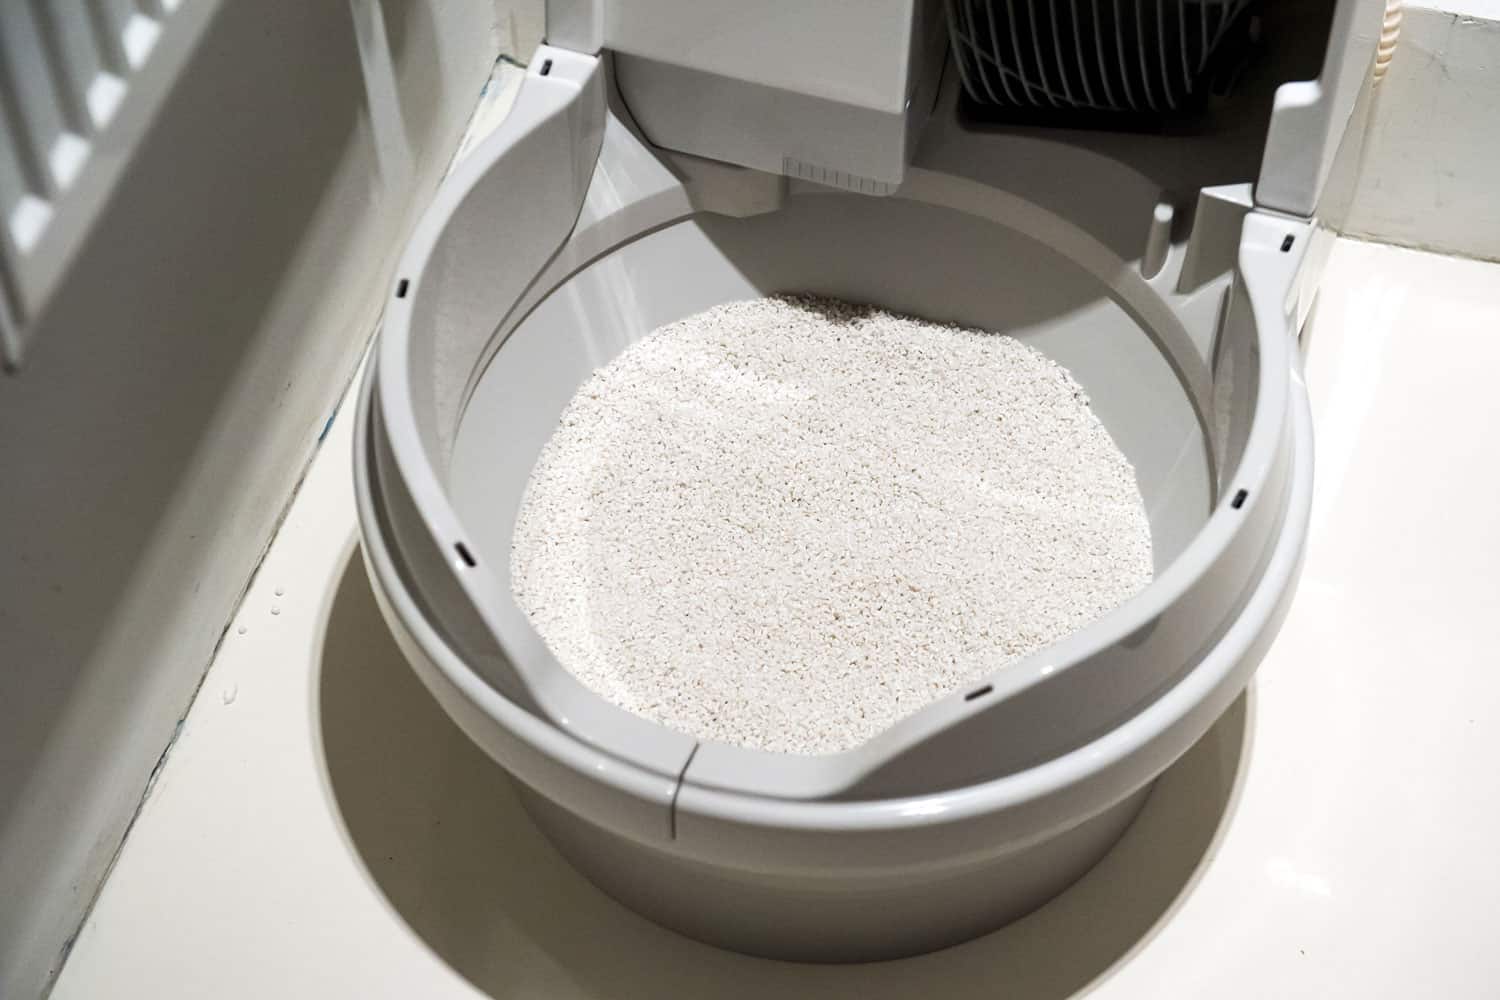 Newly cleaned litter tray of automatic cat litter box litter-robot showing yellow light